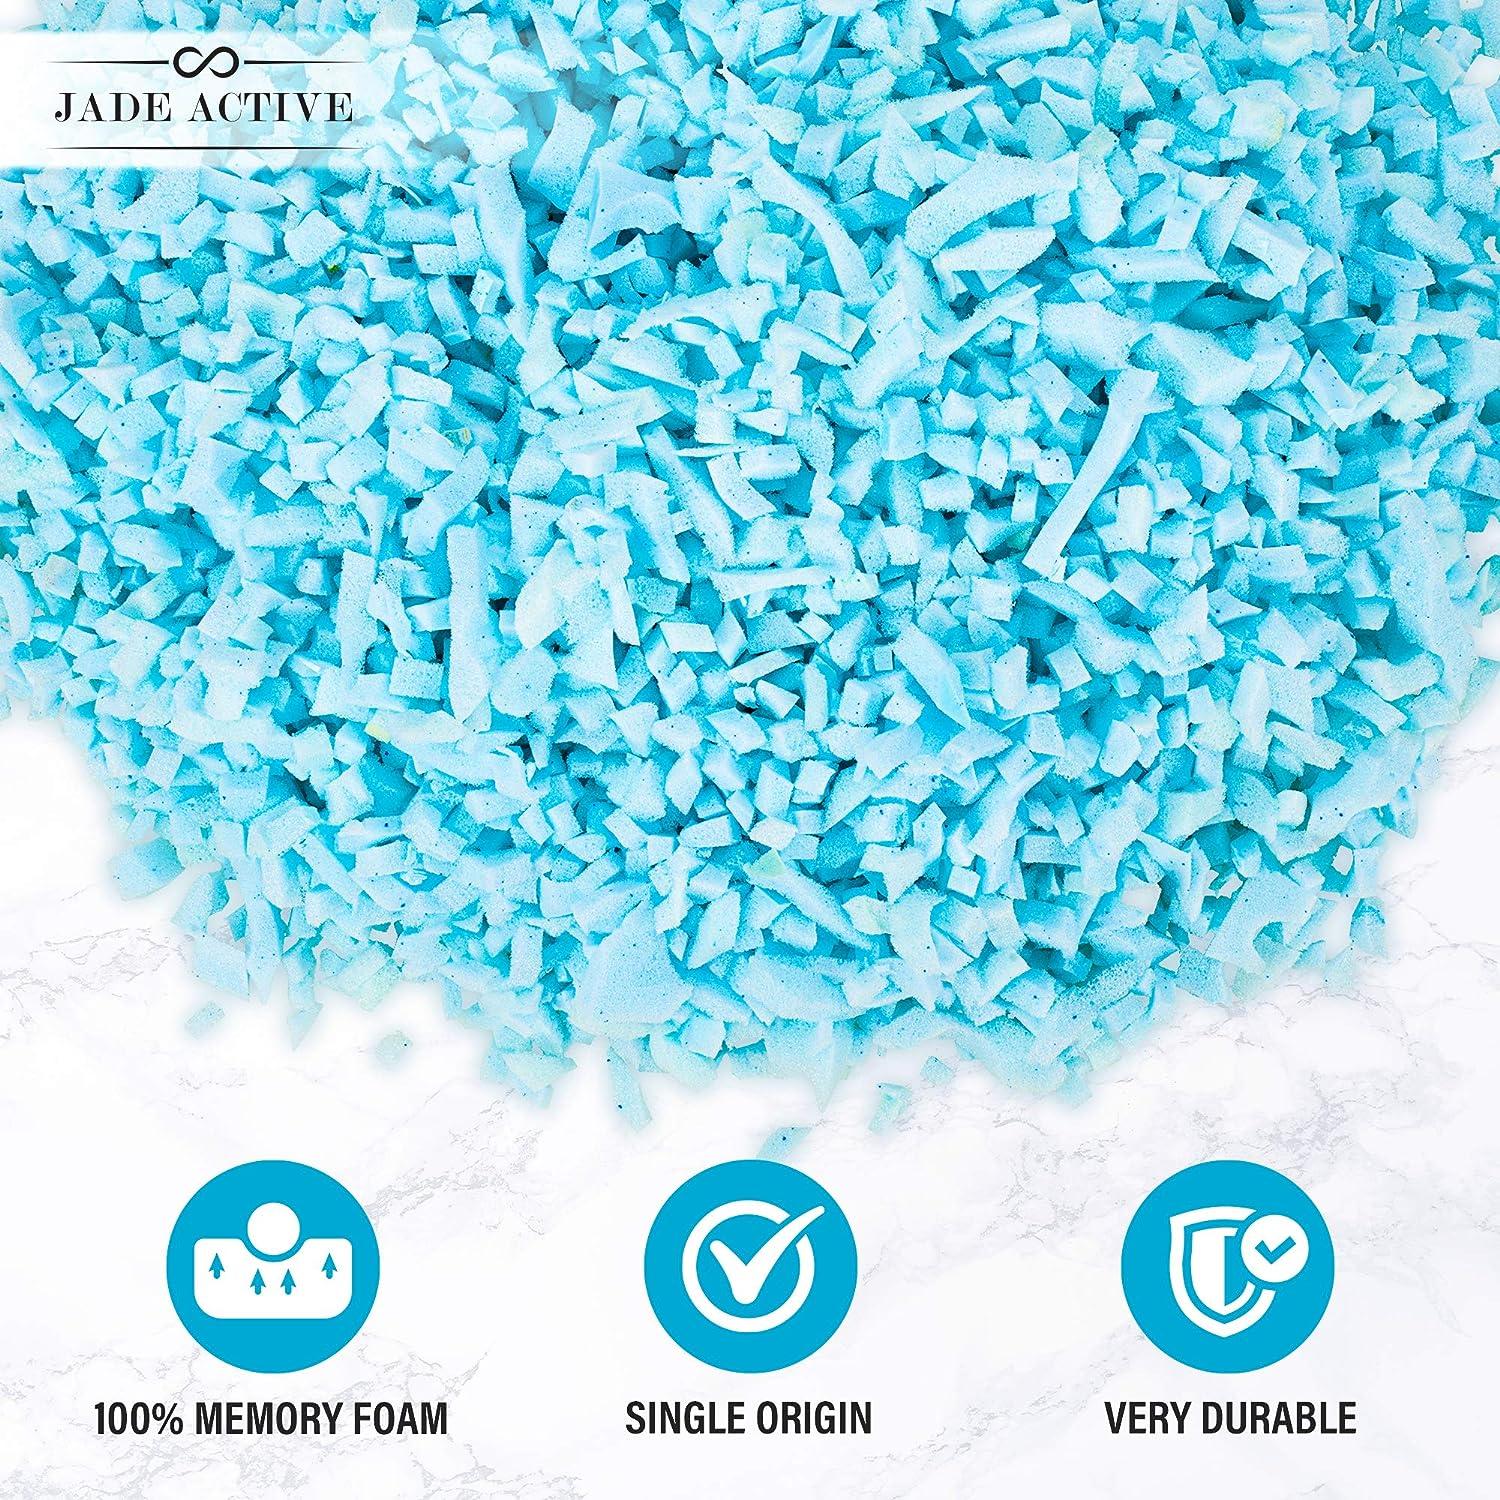 Premium Shredded Memory Foam for Dog Bed or Couch Cushion - China